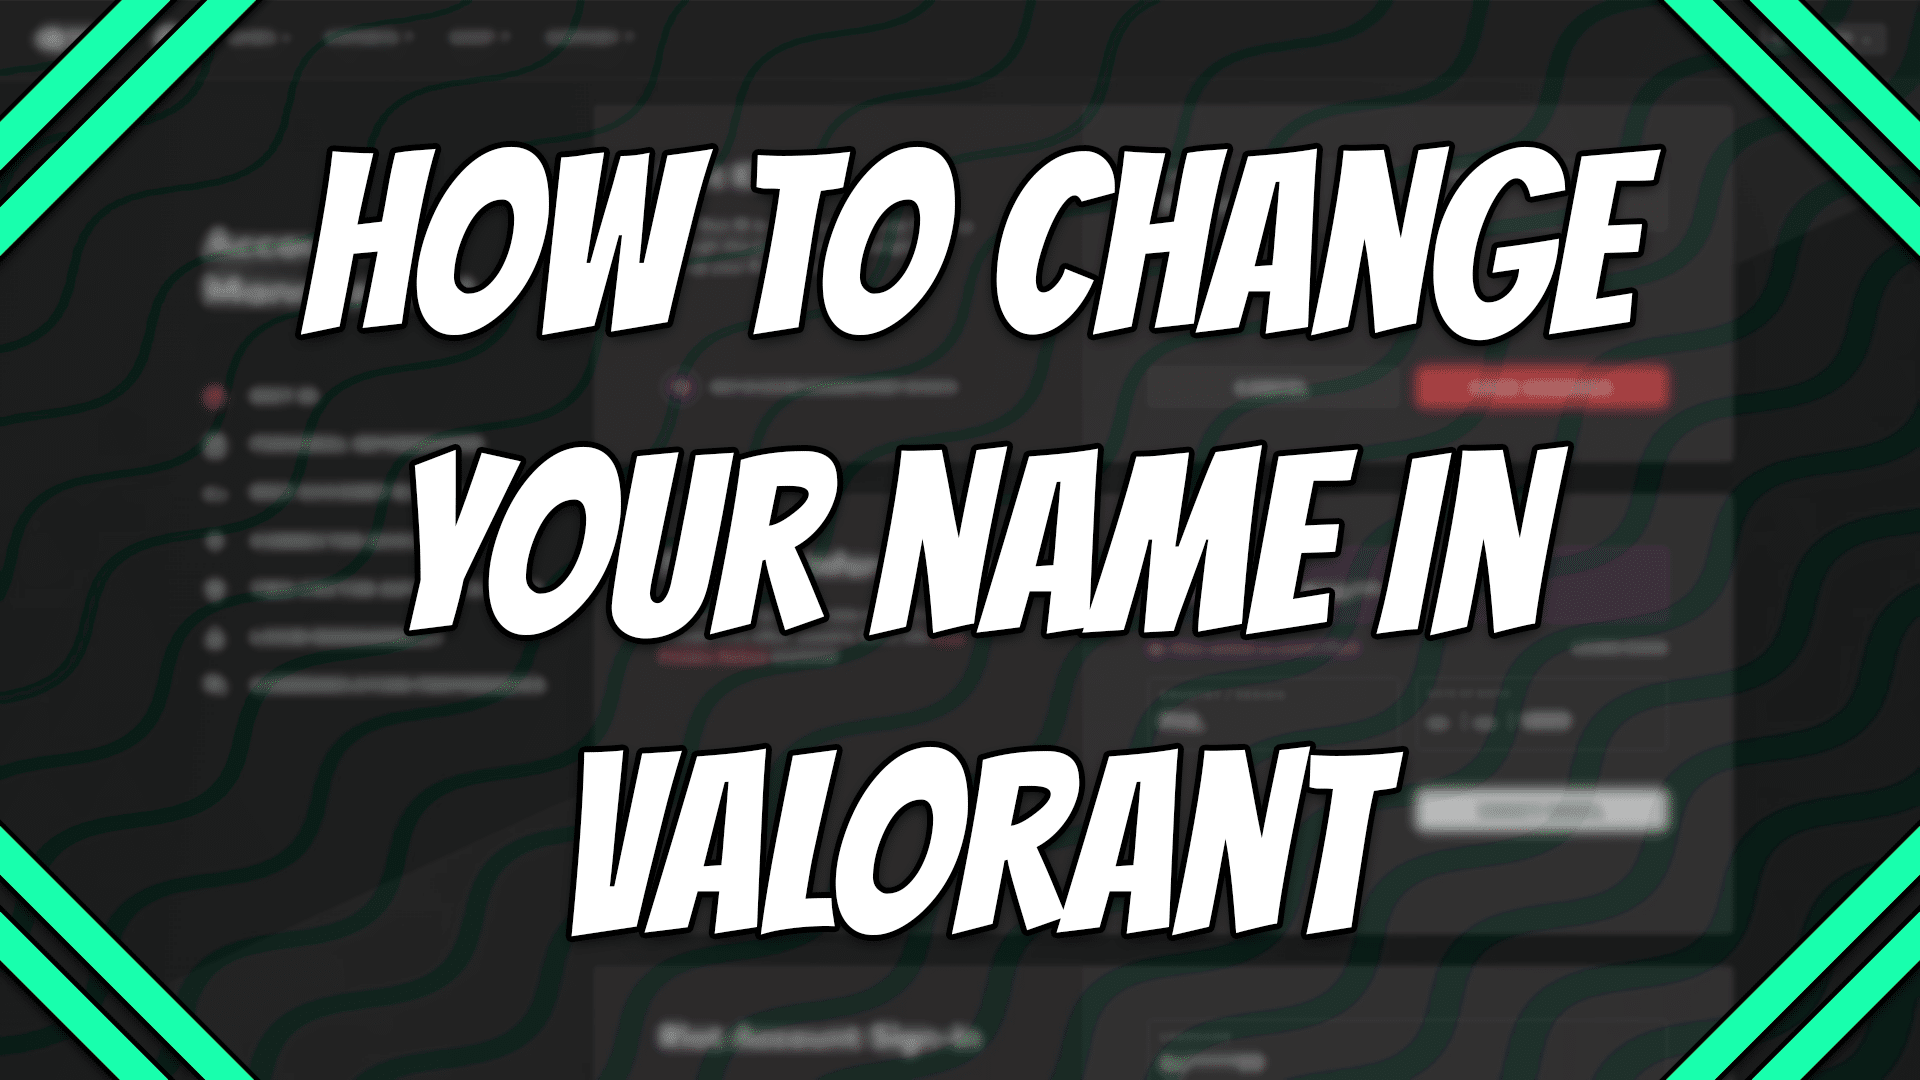 How to change your name in Valorant